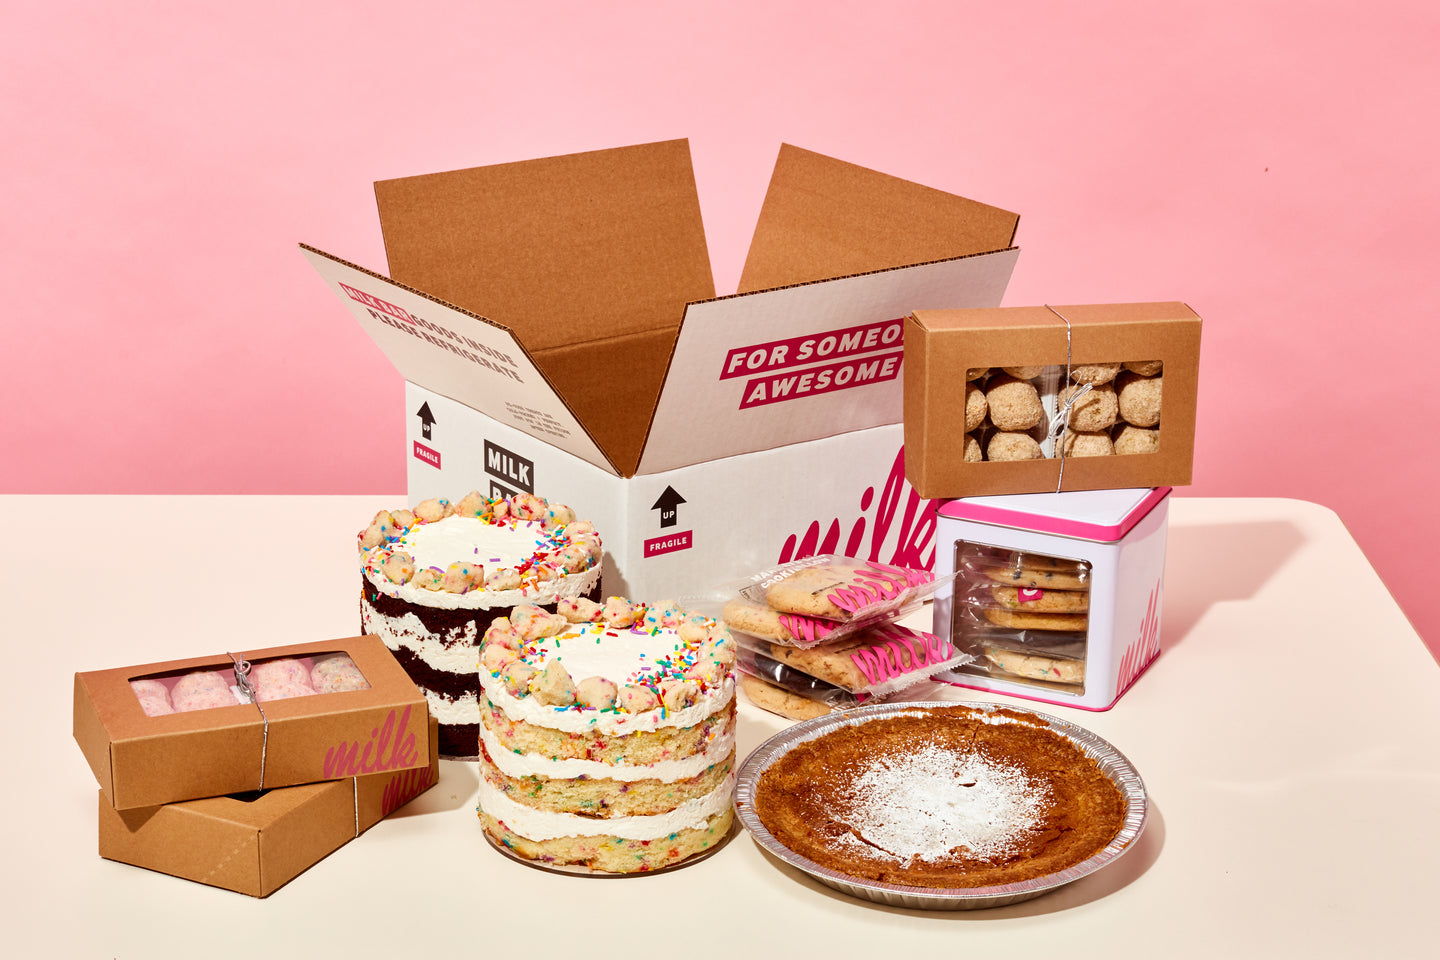 A mix of Milk Bar Classic products on a table, such as the Milk Bar Pie, 6